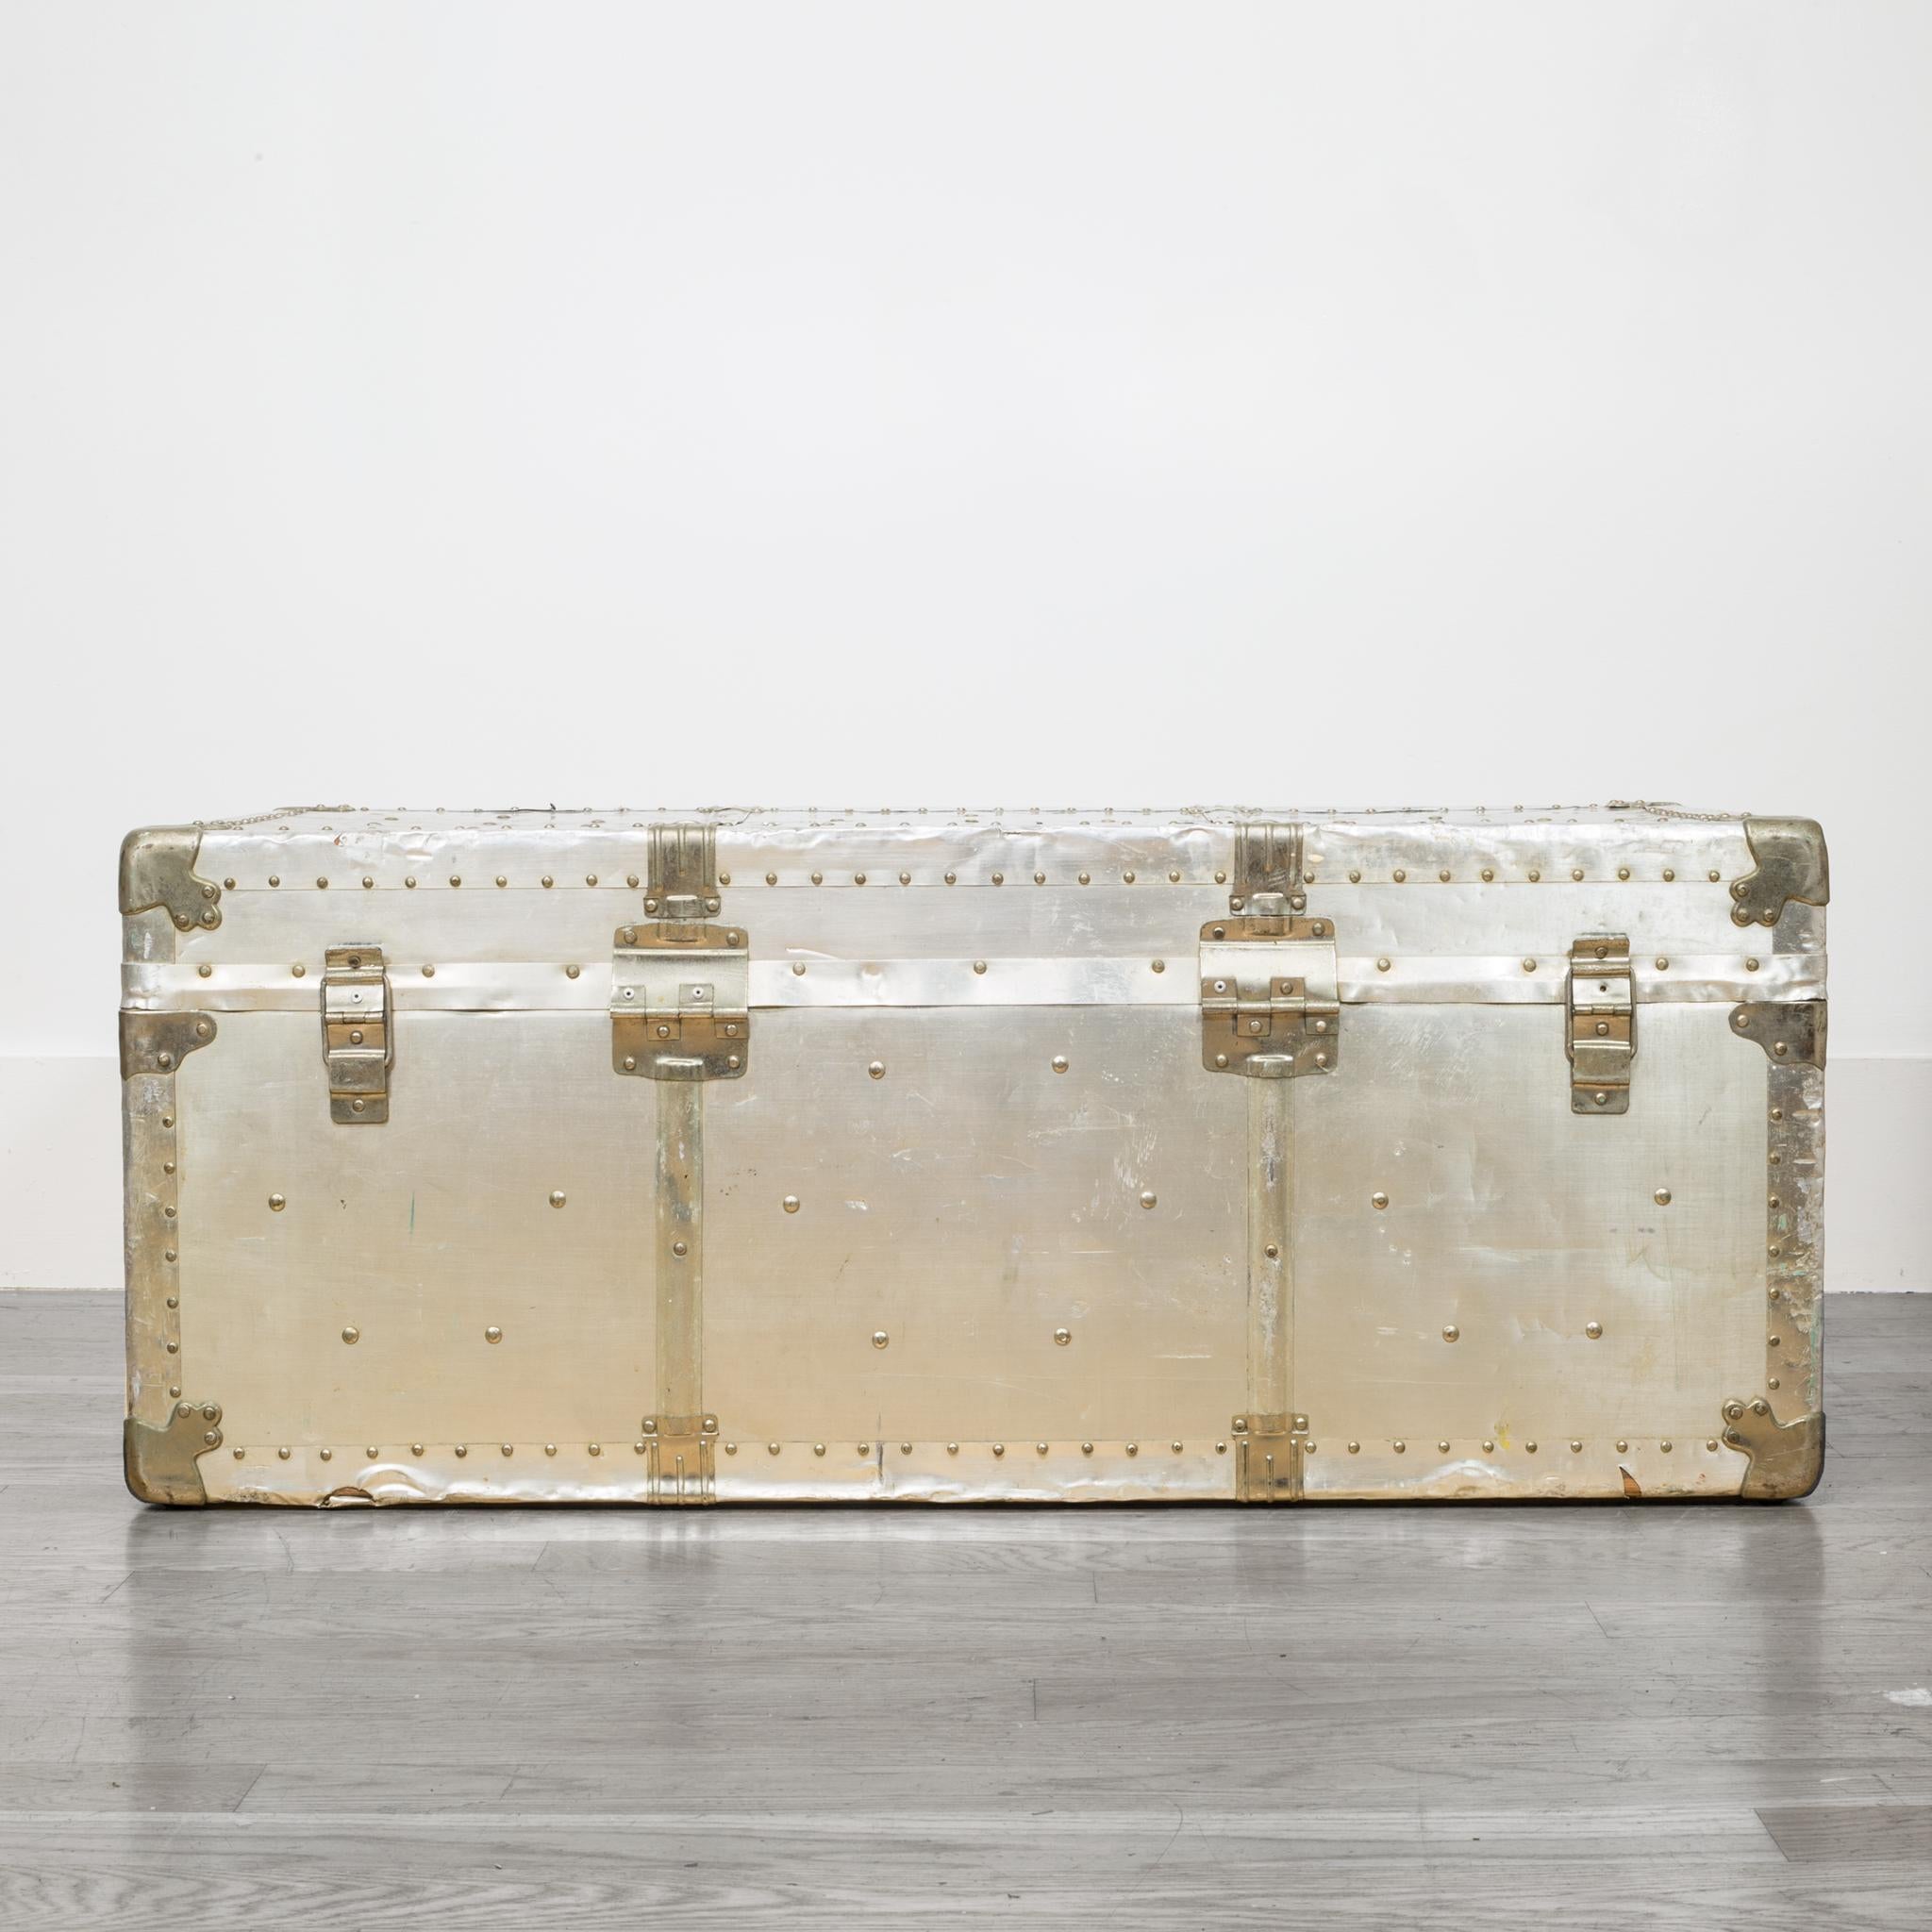 Early 20th Century Brass and Polished Aluminum Trunk with Leather Handles (Poliert)